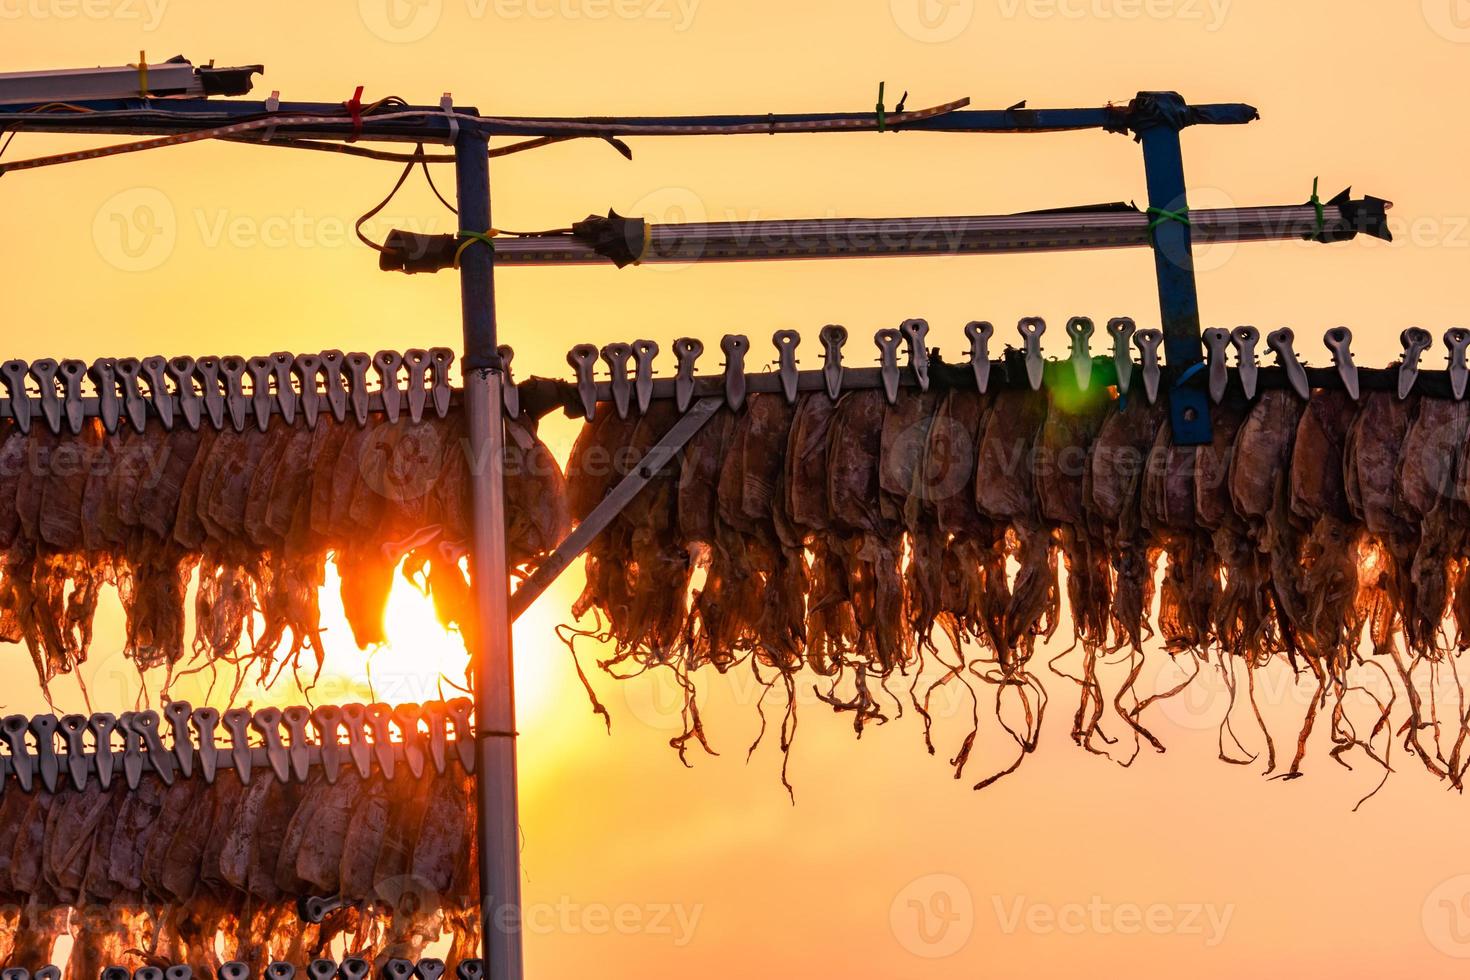 Dried squid hanging with clip in a line against sunset sky. Street food in Thailand. Delicious dried seafood. Dried cuttlefish ready to grilled and serve. Food preservation culture. Sun drying squid. photo